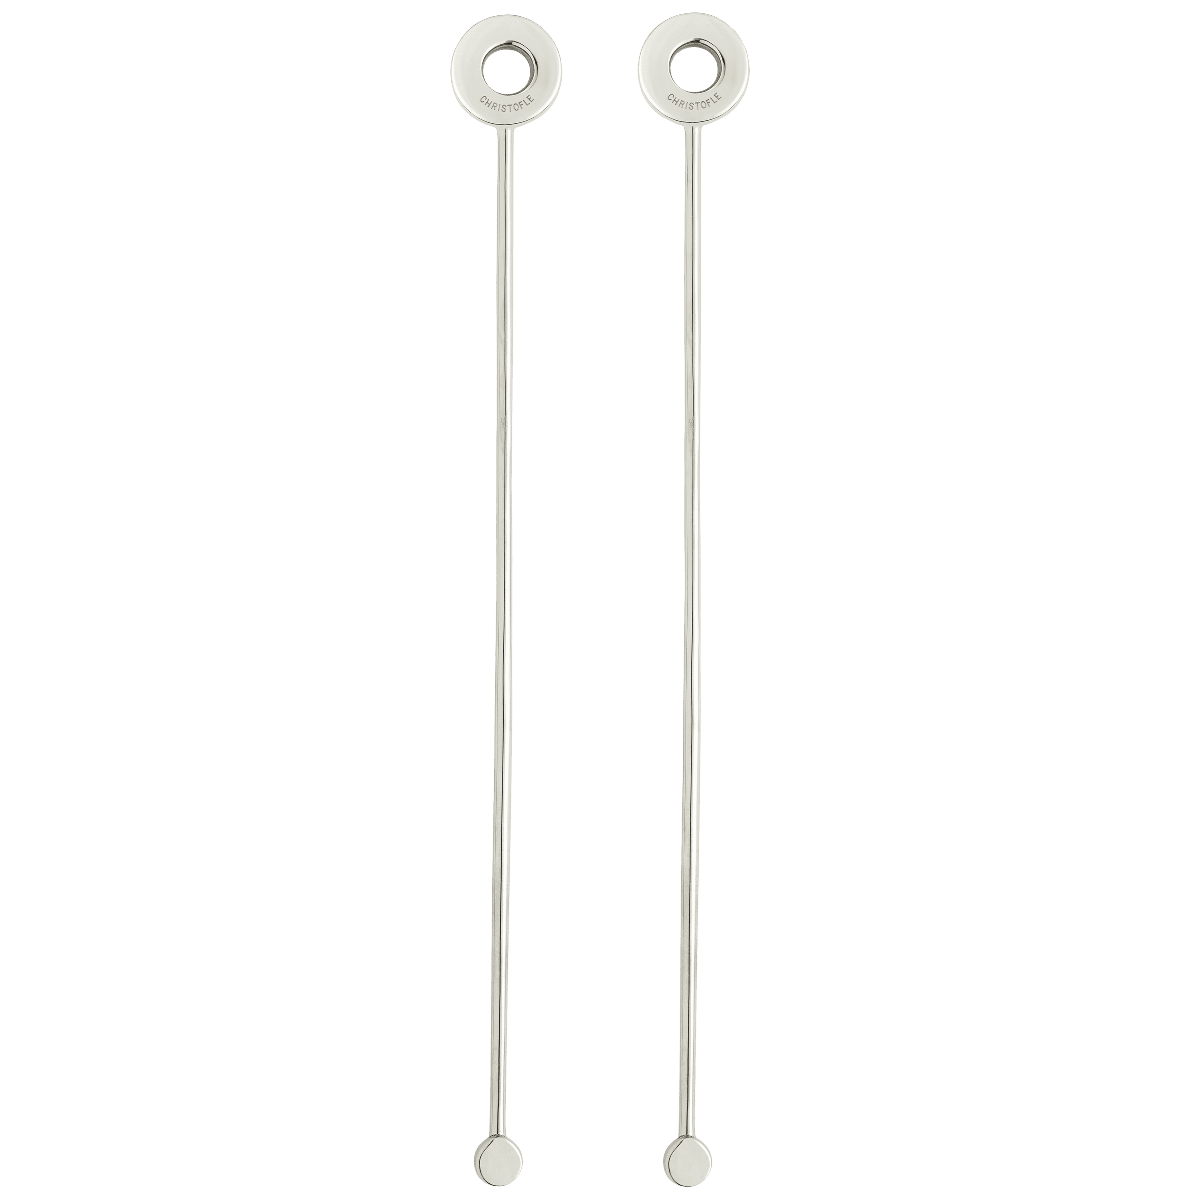 Set of 2 Stainless Steel cocktail stirrers